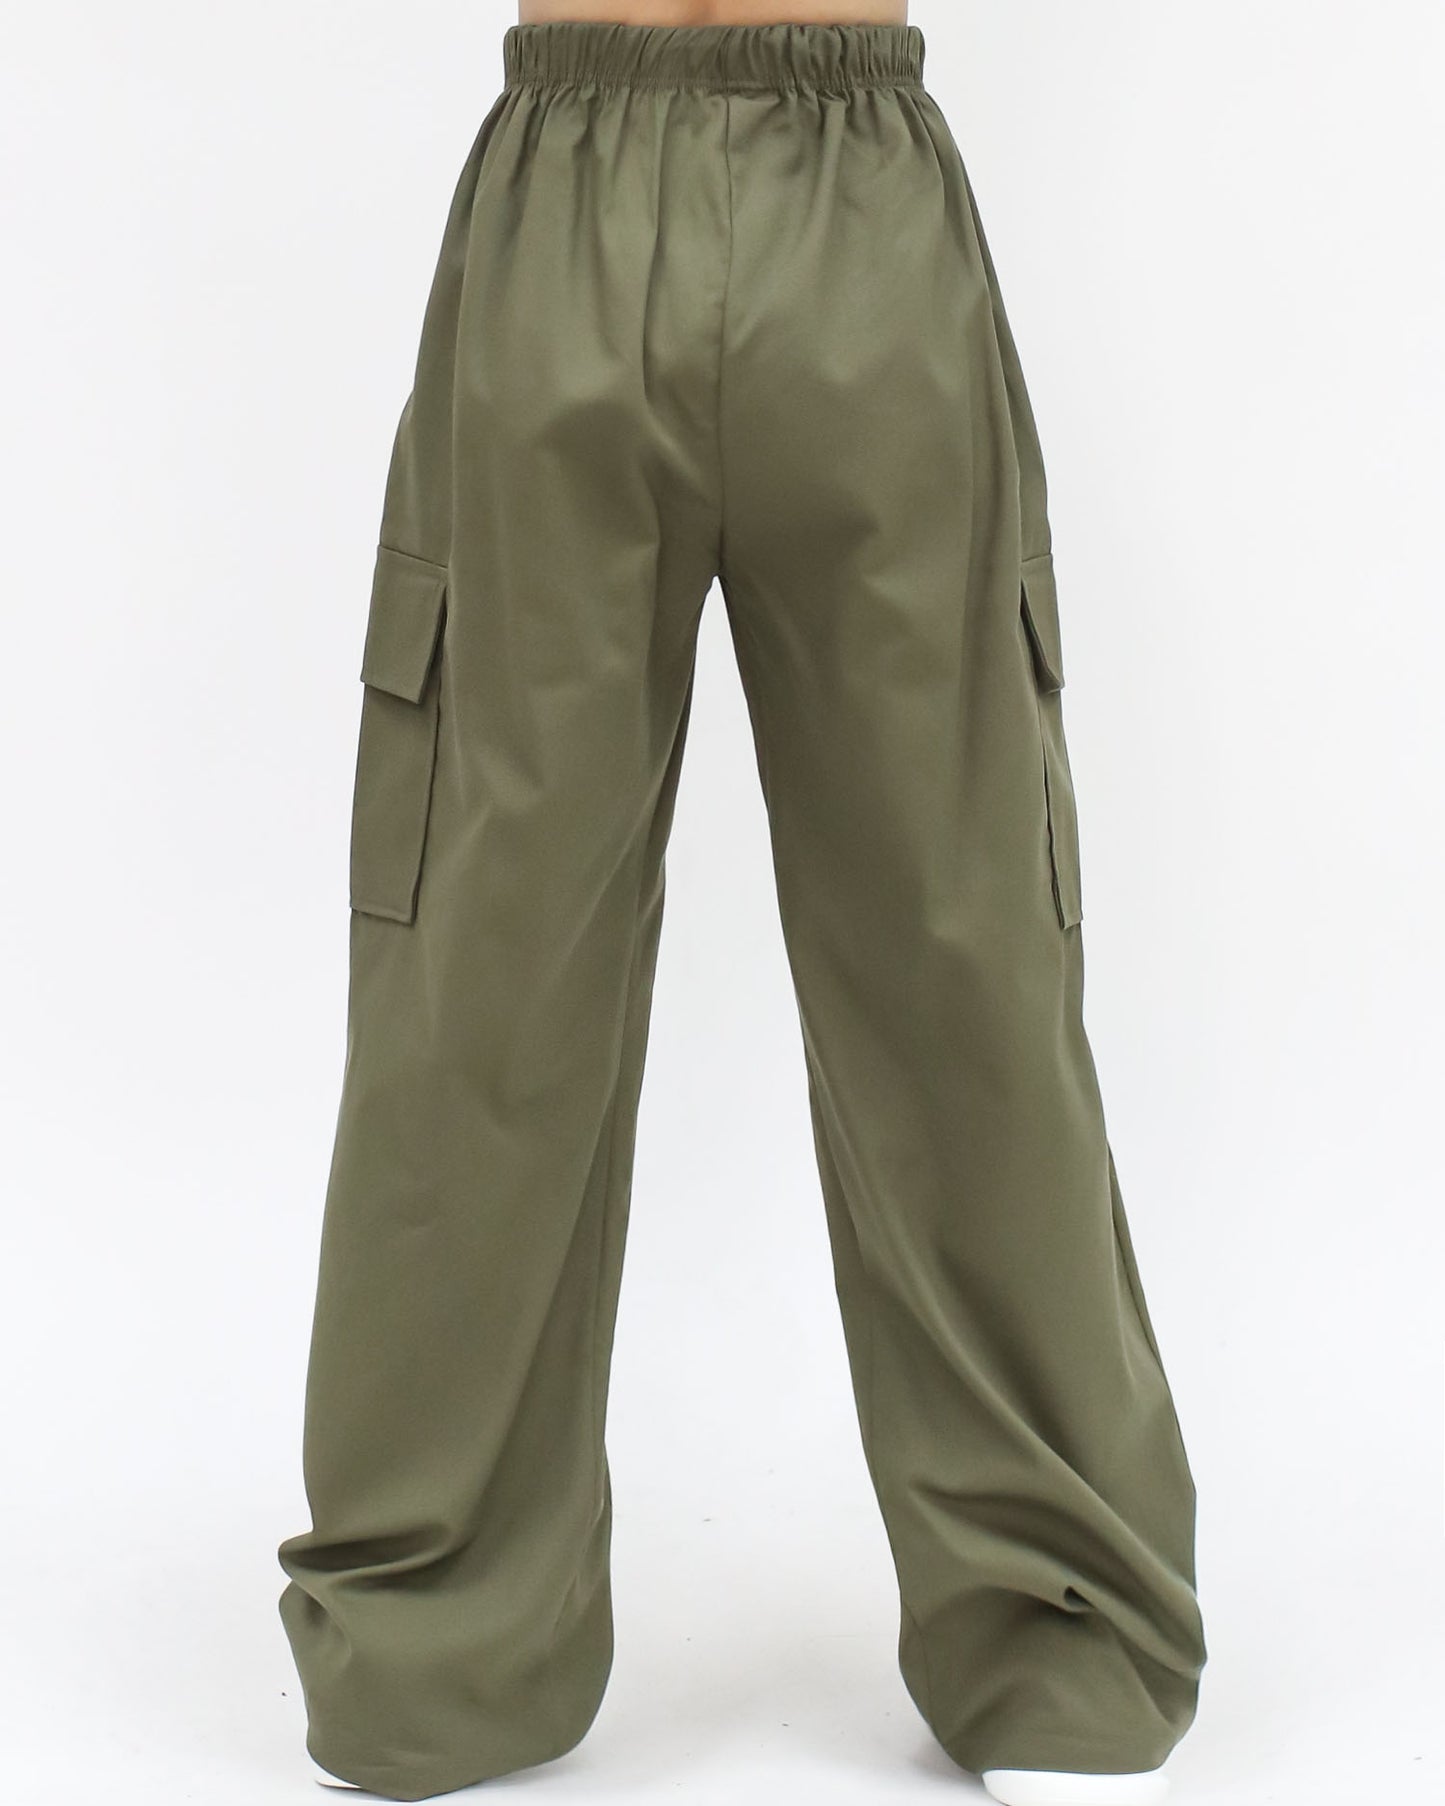 green pockets sides straight legs cotton pants *pre-order*